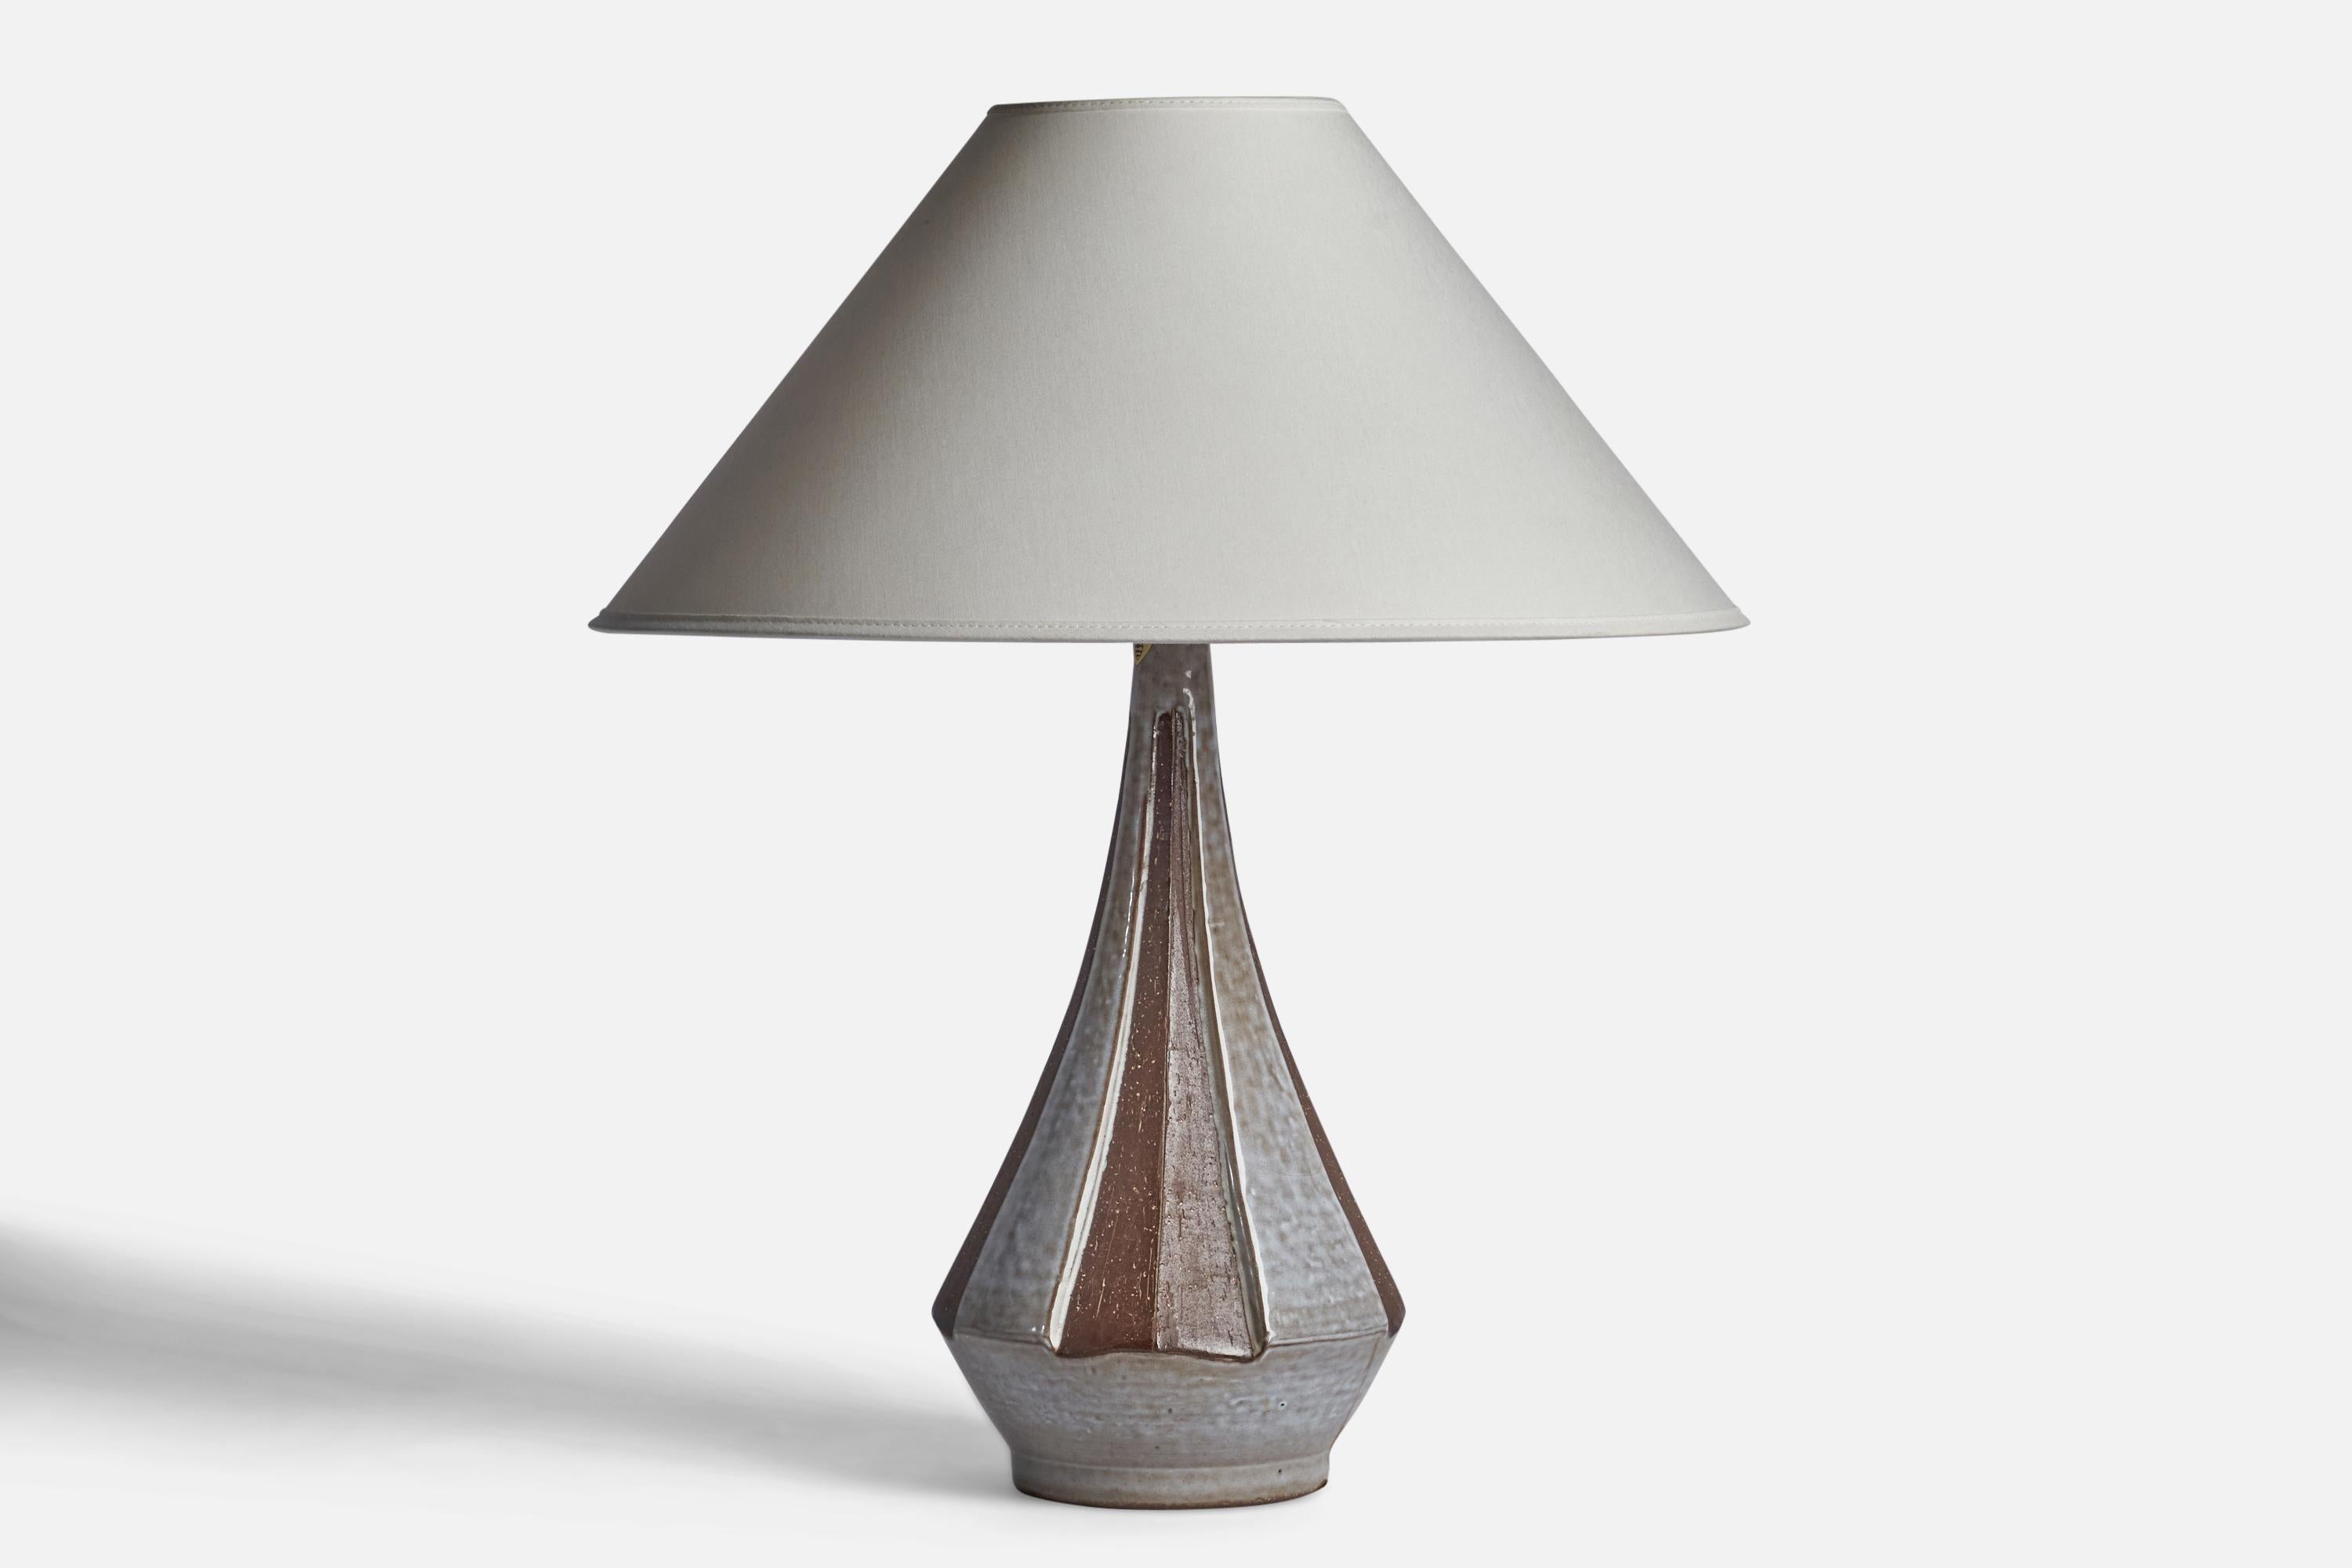 A grey and brown-glazed stoneware table lamp designed and produced by Michael Andersen, Sweden, 1960s.

Dimensions of Lamp (inches): 15” H x 6.5” Diameter
Dimensions of Shade (inches): 4.5” Top Diameter x 16” Bottom Diameter x 7.25” H
Dimensions of